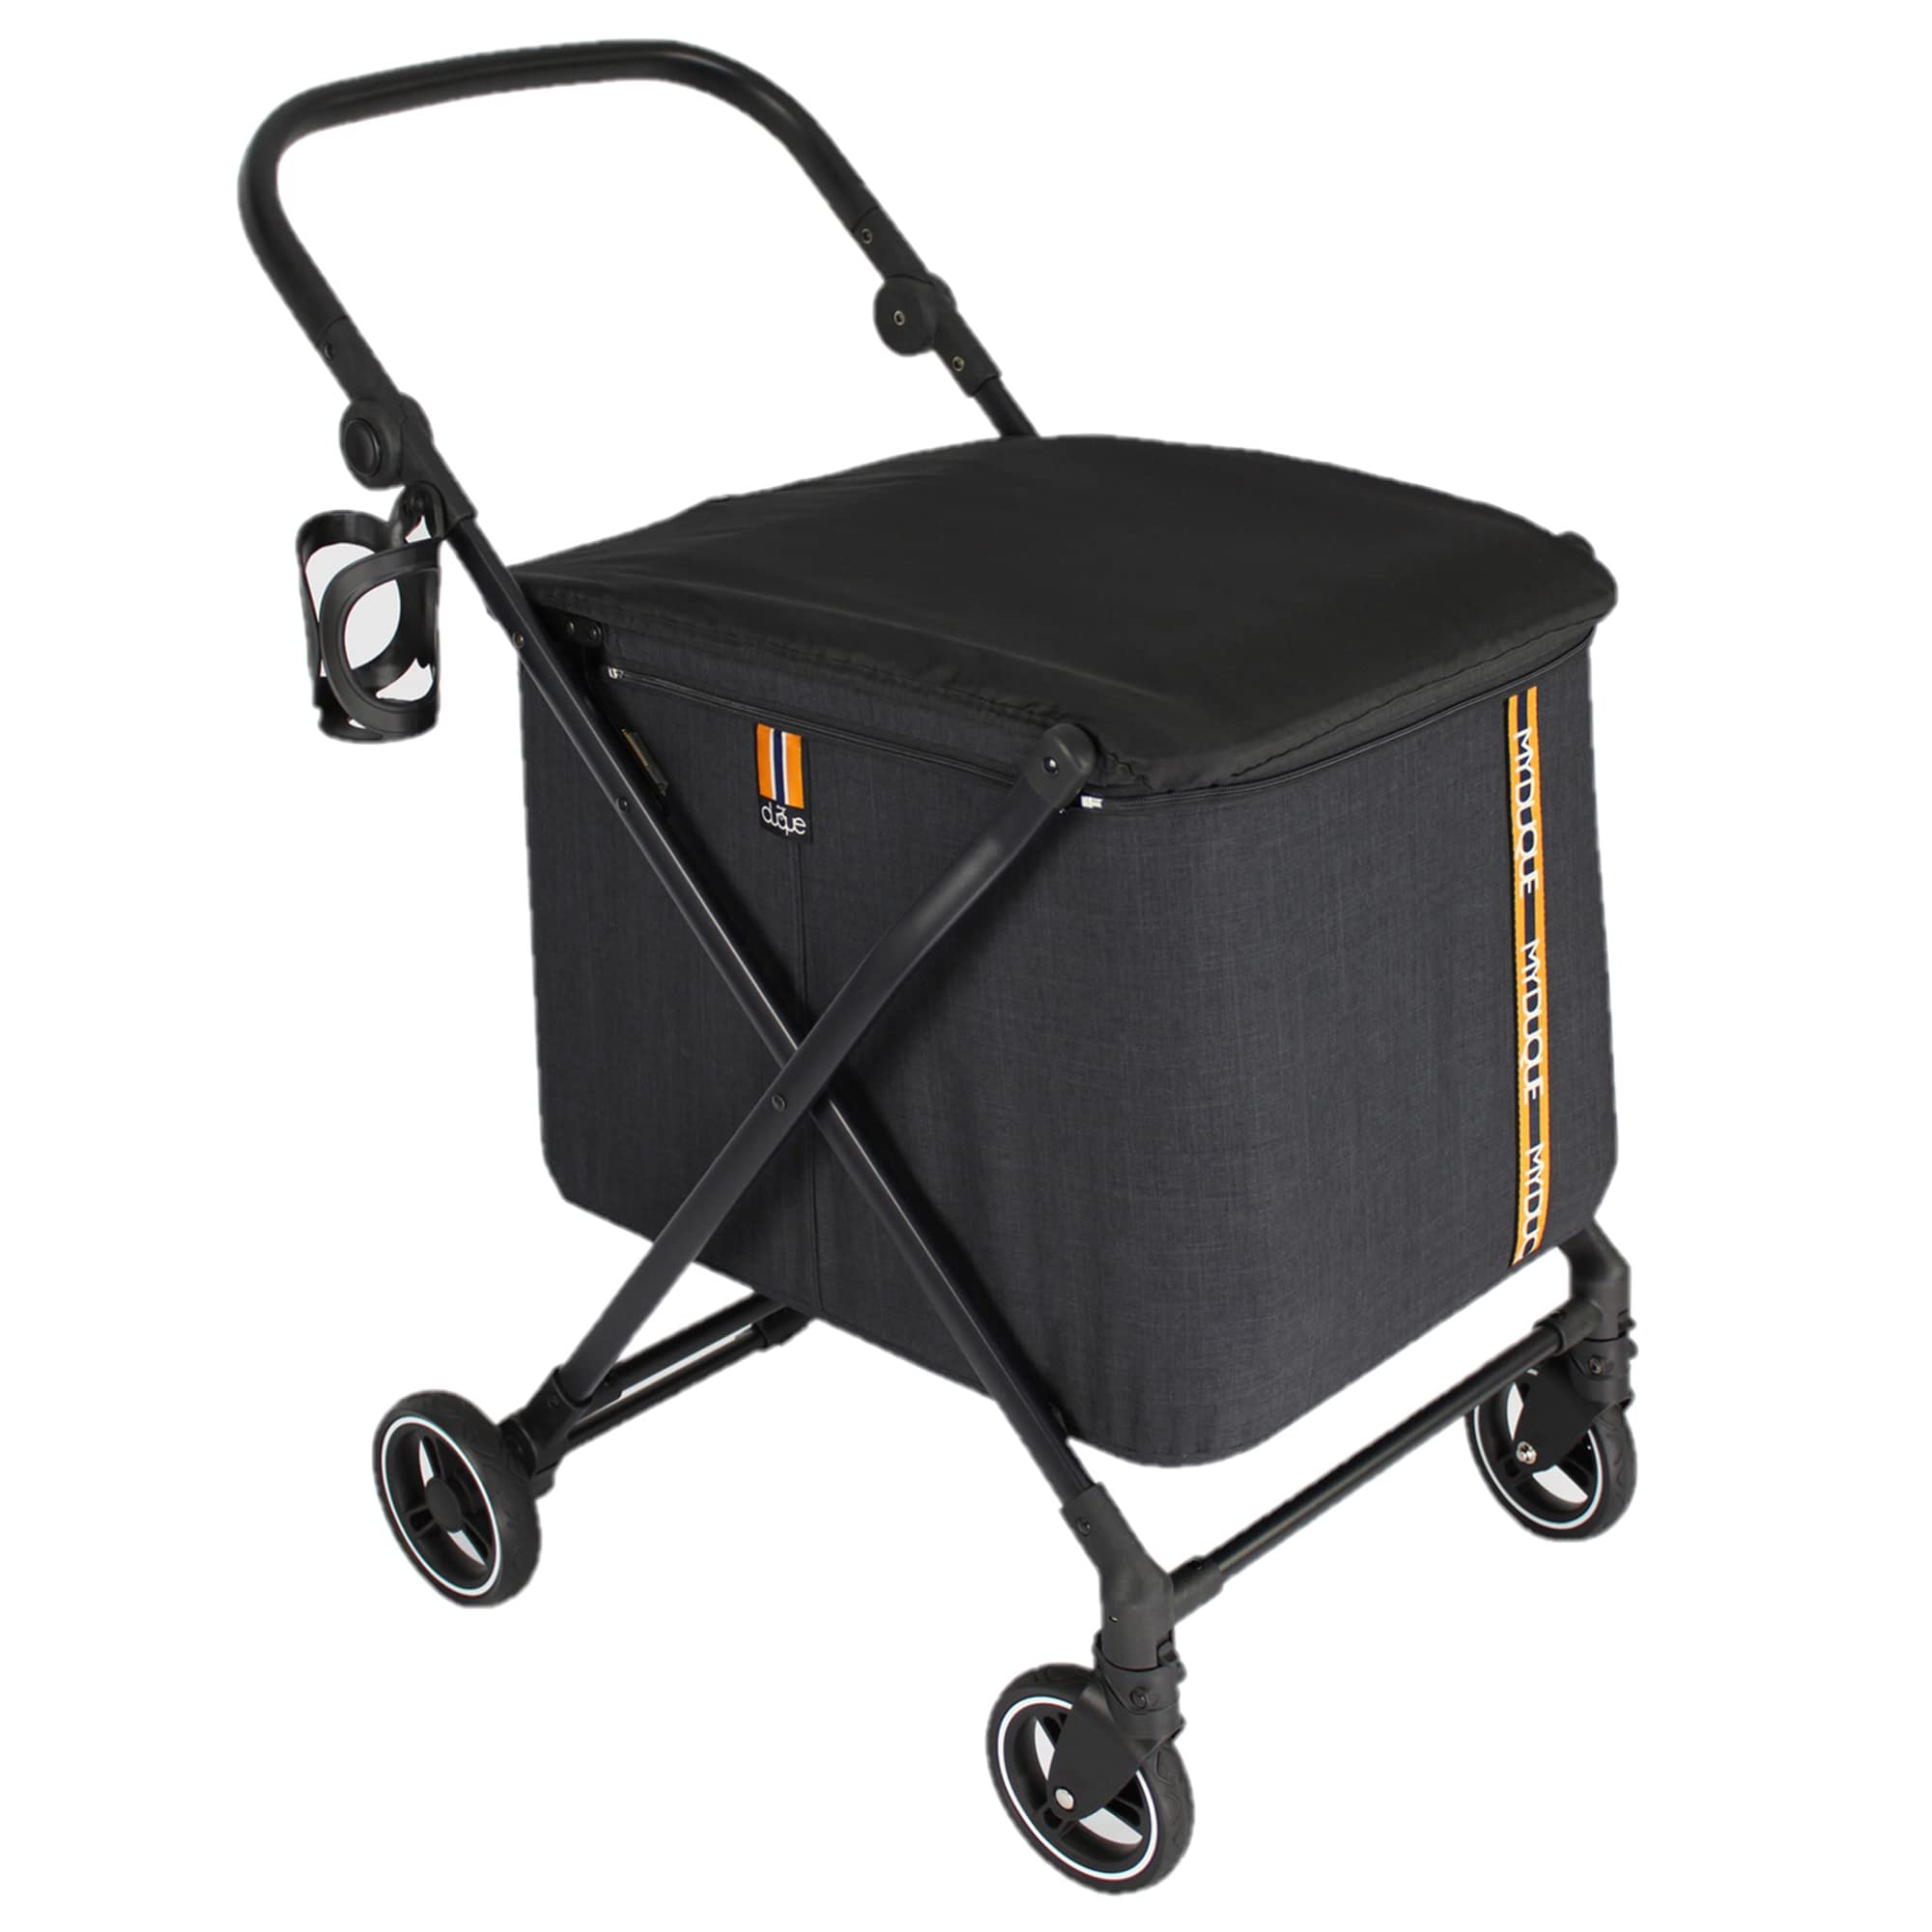 509 Crew : Personal Shopping Cart - Foldable, Portable, Lightweight Cart with Rolling Front Swivel Wheels and Height Adjustable Slider, Foot Brake, Drink Holder